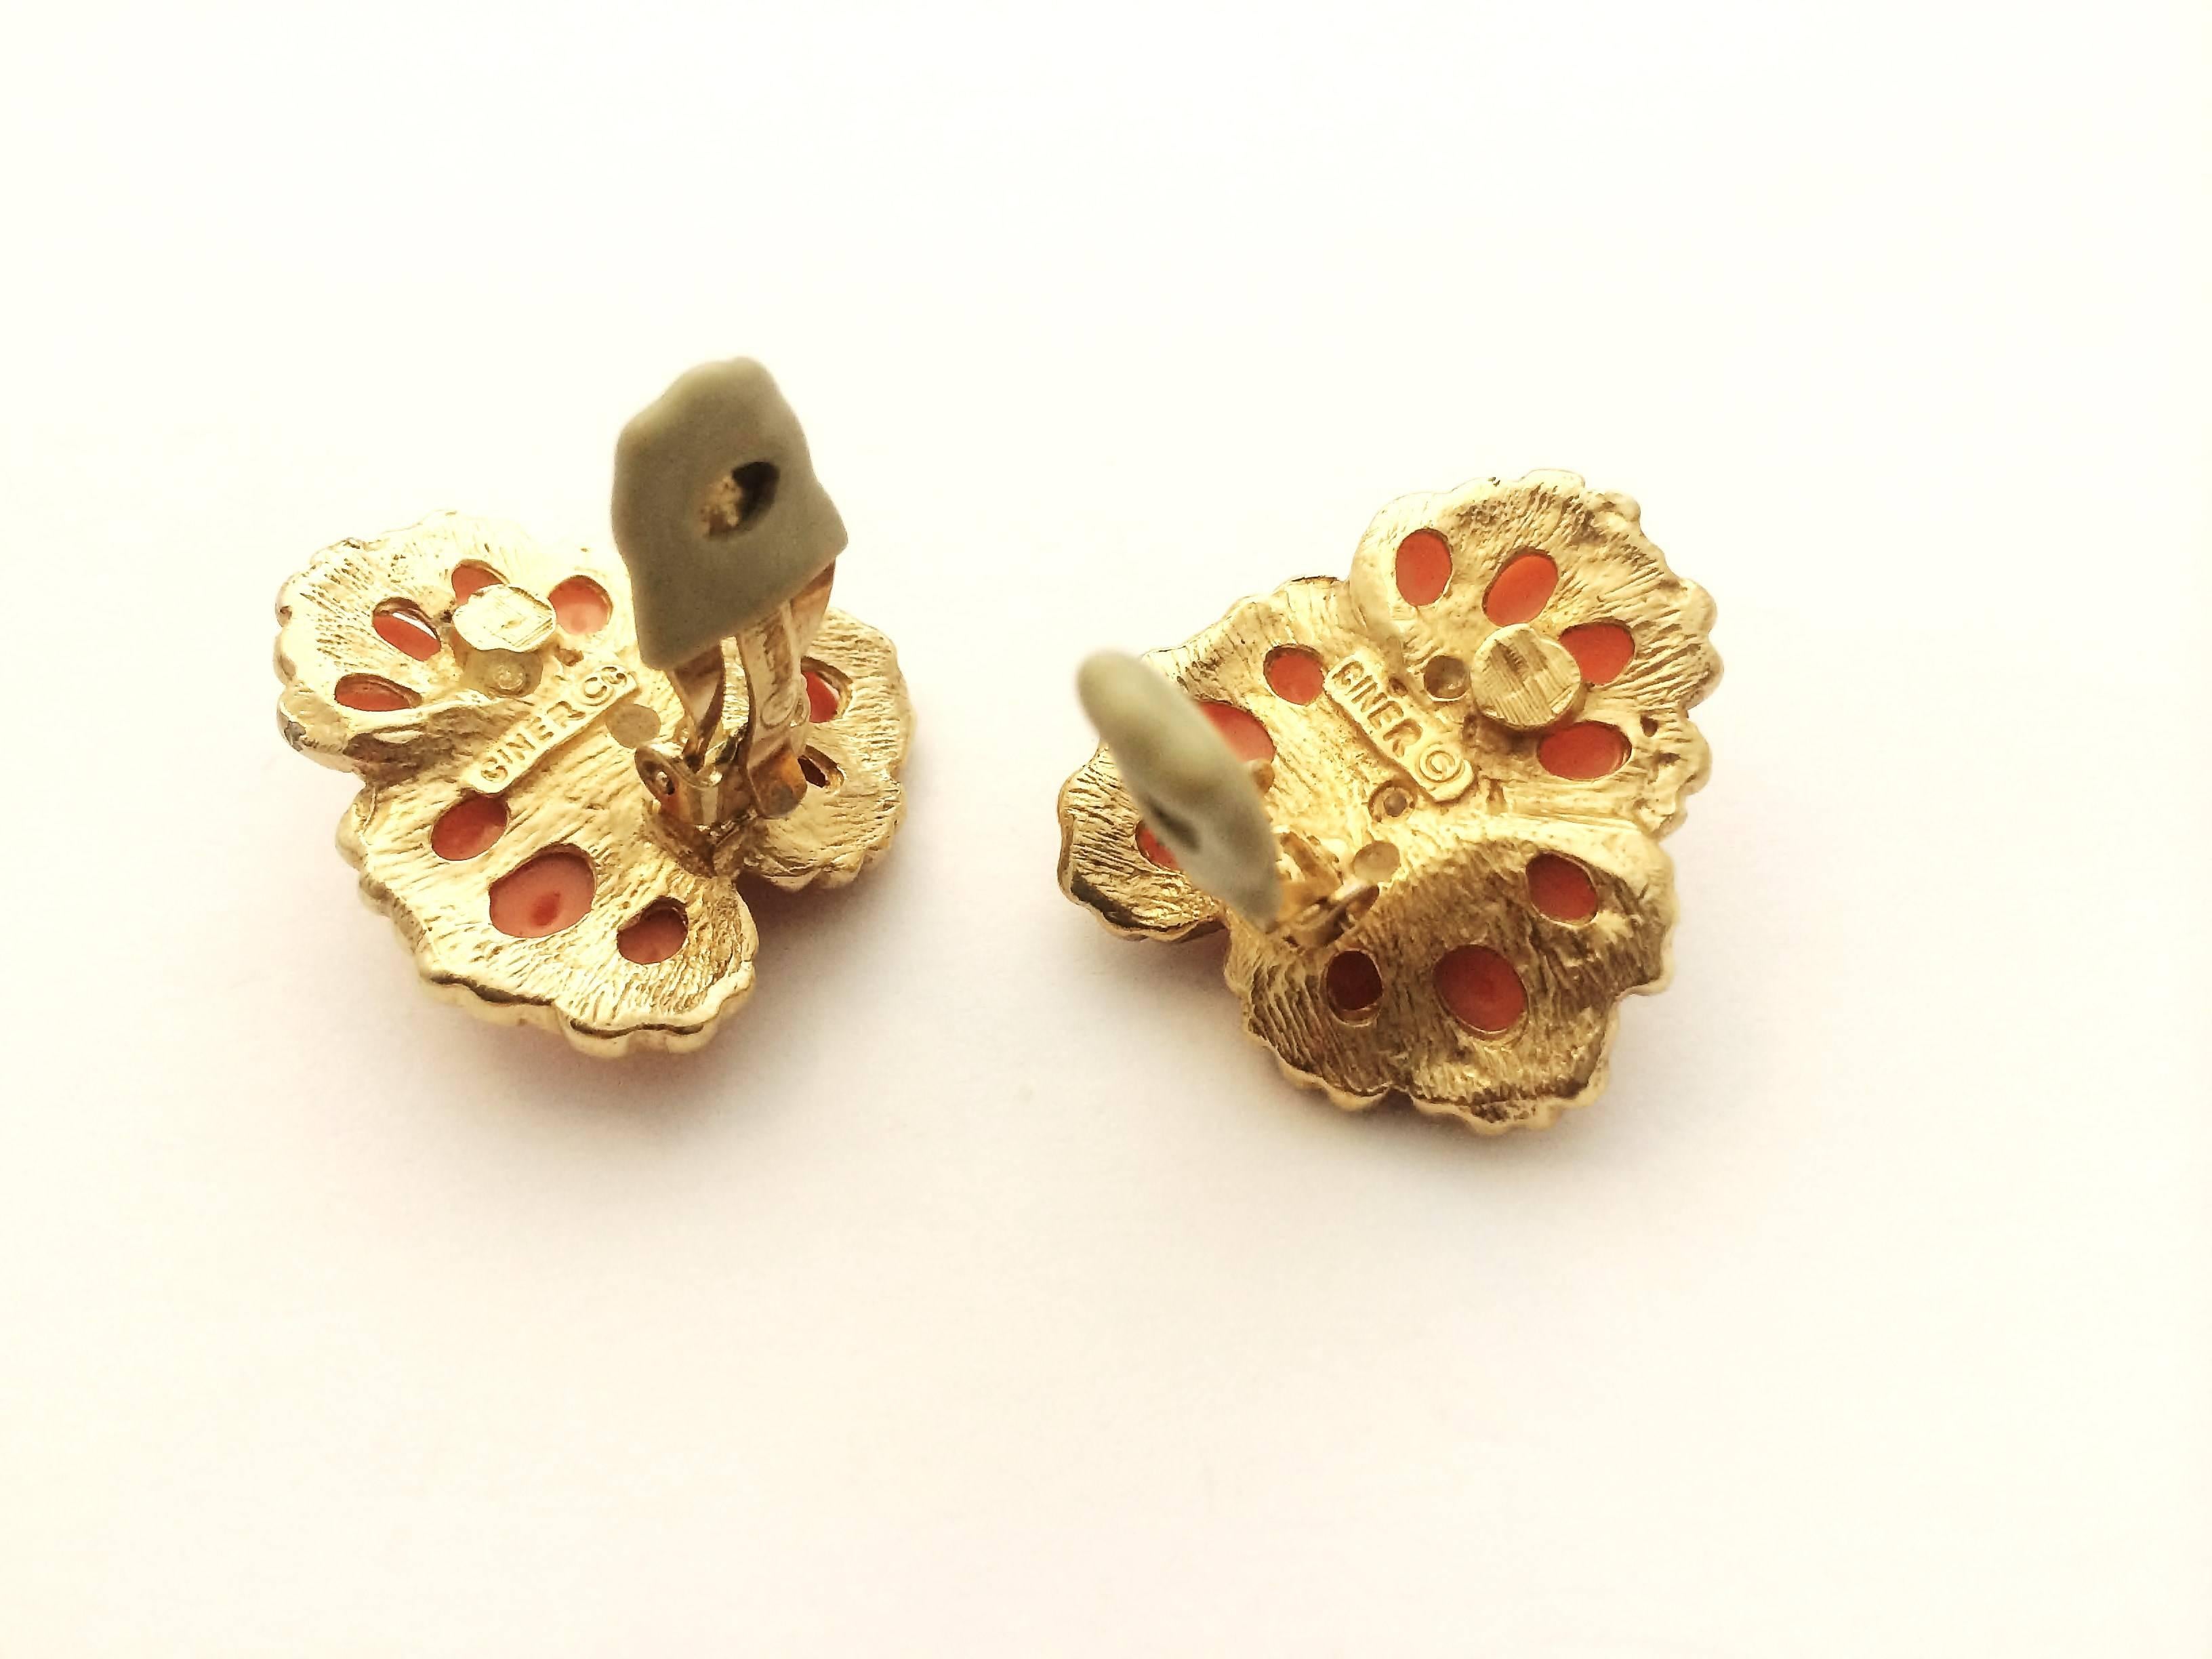 These earrings are made of soft coral cabochon and clear pastes, set in gilt metal, made in a stylised 'floral motif, typical of the glamour and scale of the 1980s. These earrings are from the estate of Deborah, Duchess of Devonshire, one of the